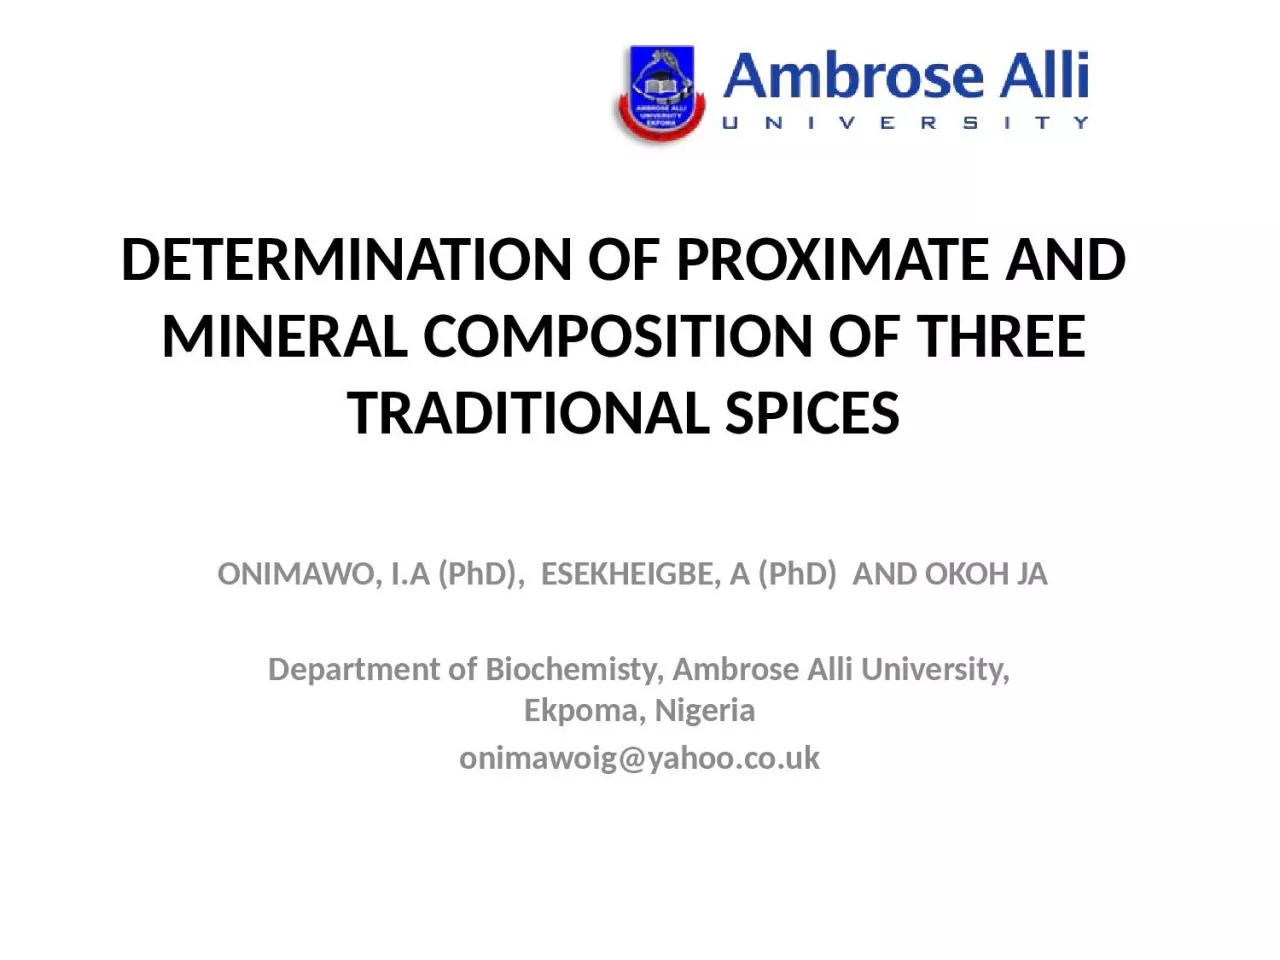 DETERMINATION  OF PROXIMATE AND MINERAL COMPOSITION OF THREE TRADITIONAL SPICES